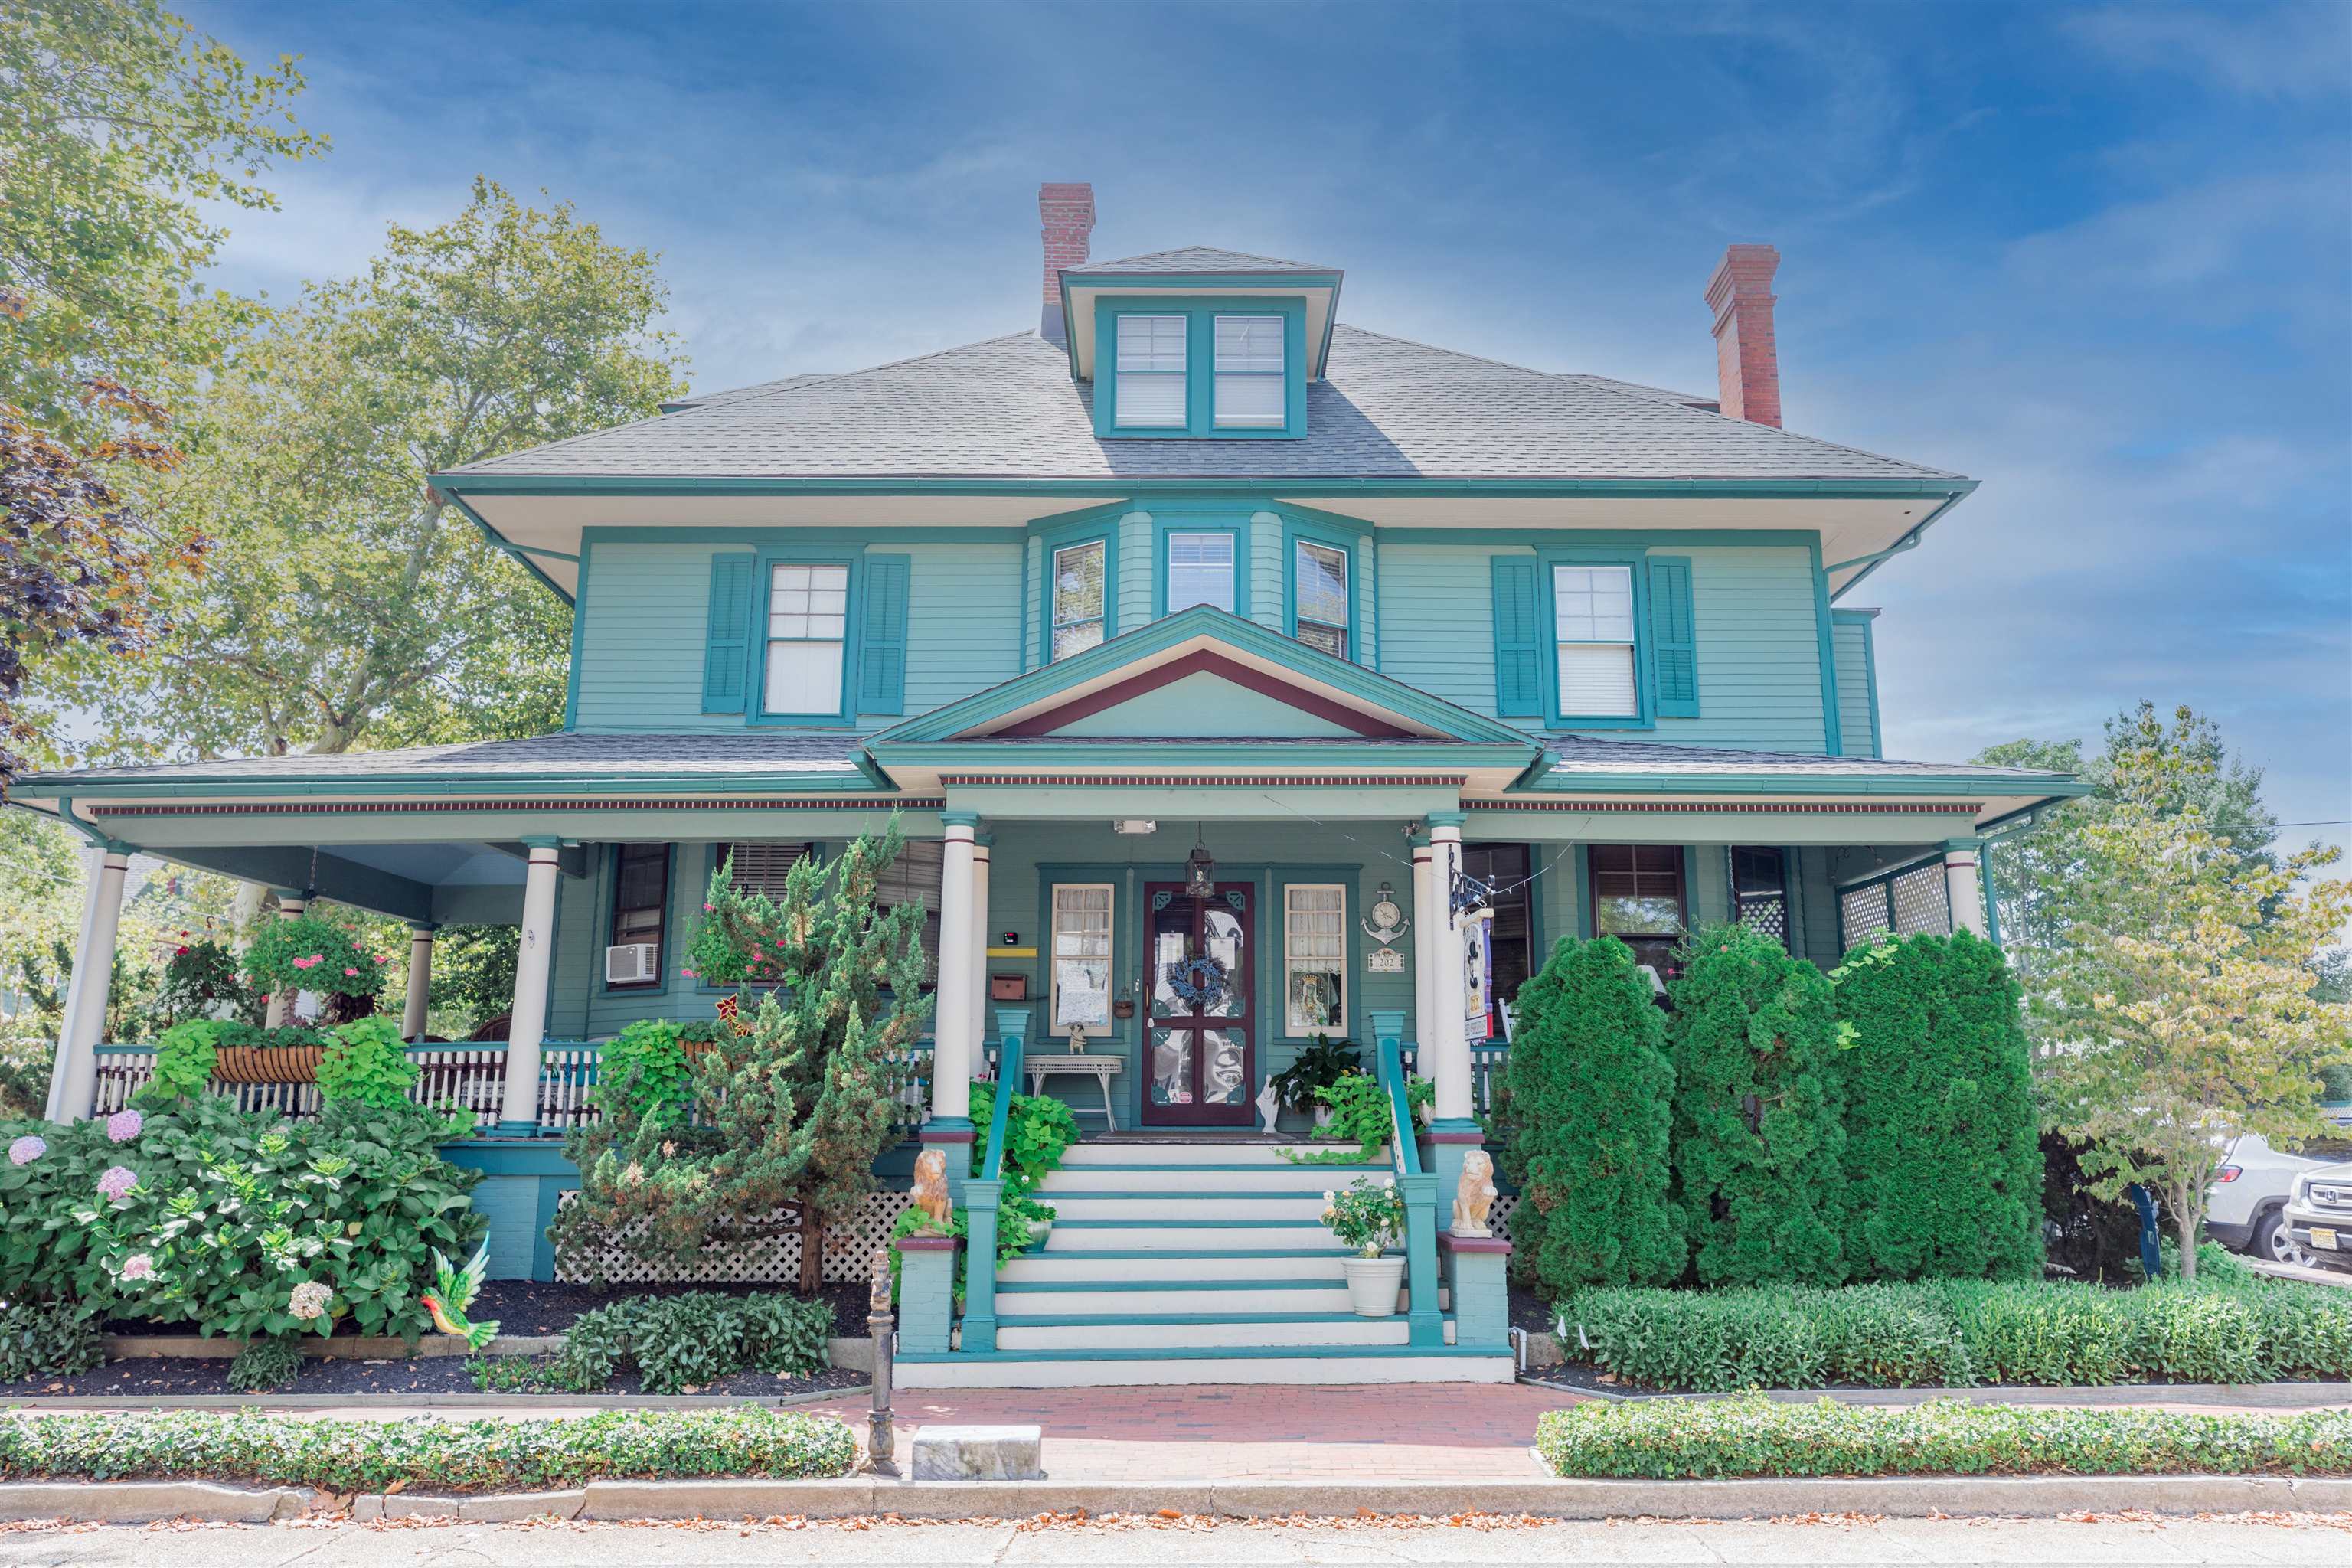 Don’t miss this opportunity to own a piece of Cape May history.  Currently operated as the Captain Mey's Inn, this turn of the century Victorian home, circa 1890 was built by Dr. Walter Phillips.  The corner location just steps to both the mall and beaches of Cape May make this the best location to enjoy all that the wonderful town has to offer.  Make it your own as either a single-family property or maintain the B&B license and continue it as your new creation.  Painstakingly renovated and update while respecting its heritage and original character this 13 bedroom, 11 bath home boasts large scale rooms, elegant detailing and beautiful woodwork throughout. Step onto the front porch that wraps around onto tree lined Hughes Street.  The 1st room upon entry is the Office Quarters (named for the Doctors visiting room).  A large ornate hallway leads to the beautiful living room (parlor) and connects to the fabulous dining room.  Down the hall is the highly desirable Captains Quarters with private bath and side entrance.  Step into the hall bath and head back towards the spacious kitchen, laundry room with steps to the off street parking spot, and the utility room with steps to the private 40 x 100 parking lot.  The 2nd level is home to 4 bedrooms with private baths and a 5th bedroom with a hall bath.  The spacious hallway takes you to the 3rd floor landing with fire escape. The 3rd level is home to 2 large bedrooms with private baths that have whirlpool tubs.  The owner’s quarters are in the lower level and offer a living room, kitchen, 4 bedrooms and 2 baths with an exterior and interior entrance.  Amenities include a new roof, recently stained wood siding, numerous stained-glass pieces that have been restored, oak and pine floors, new gas HWH, pecks plumbing, Shore’s security system and a State Fire Inspection. The parking lot owned as a separate parcel offers 8 parking spots and a picnic area.  The brick sidewalk adds that last touch of beauty!  Showings by appointment only due to a working business.